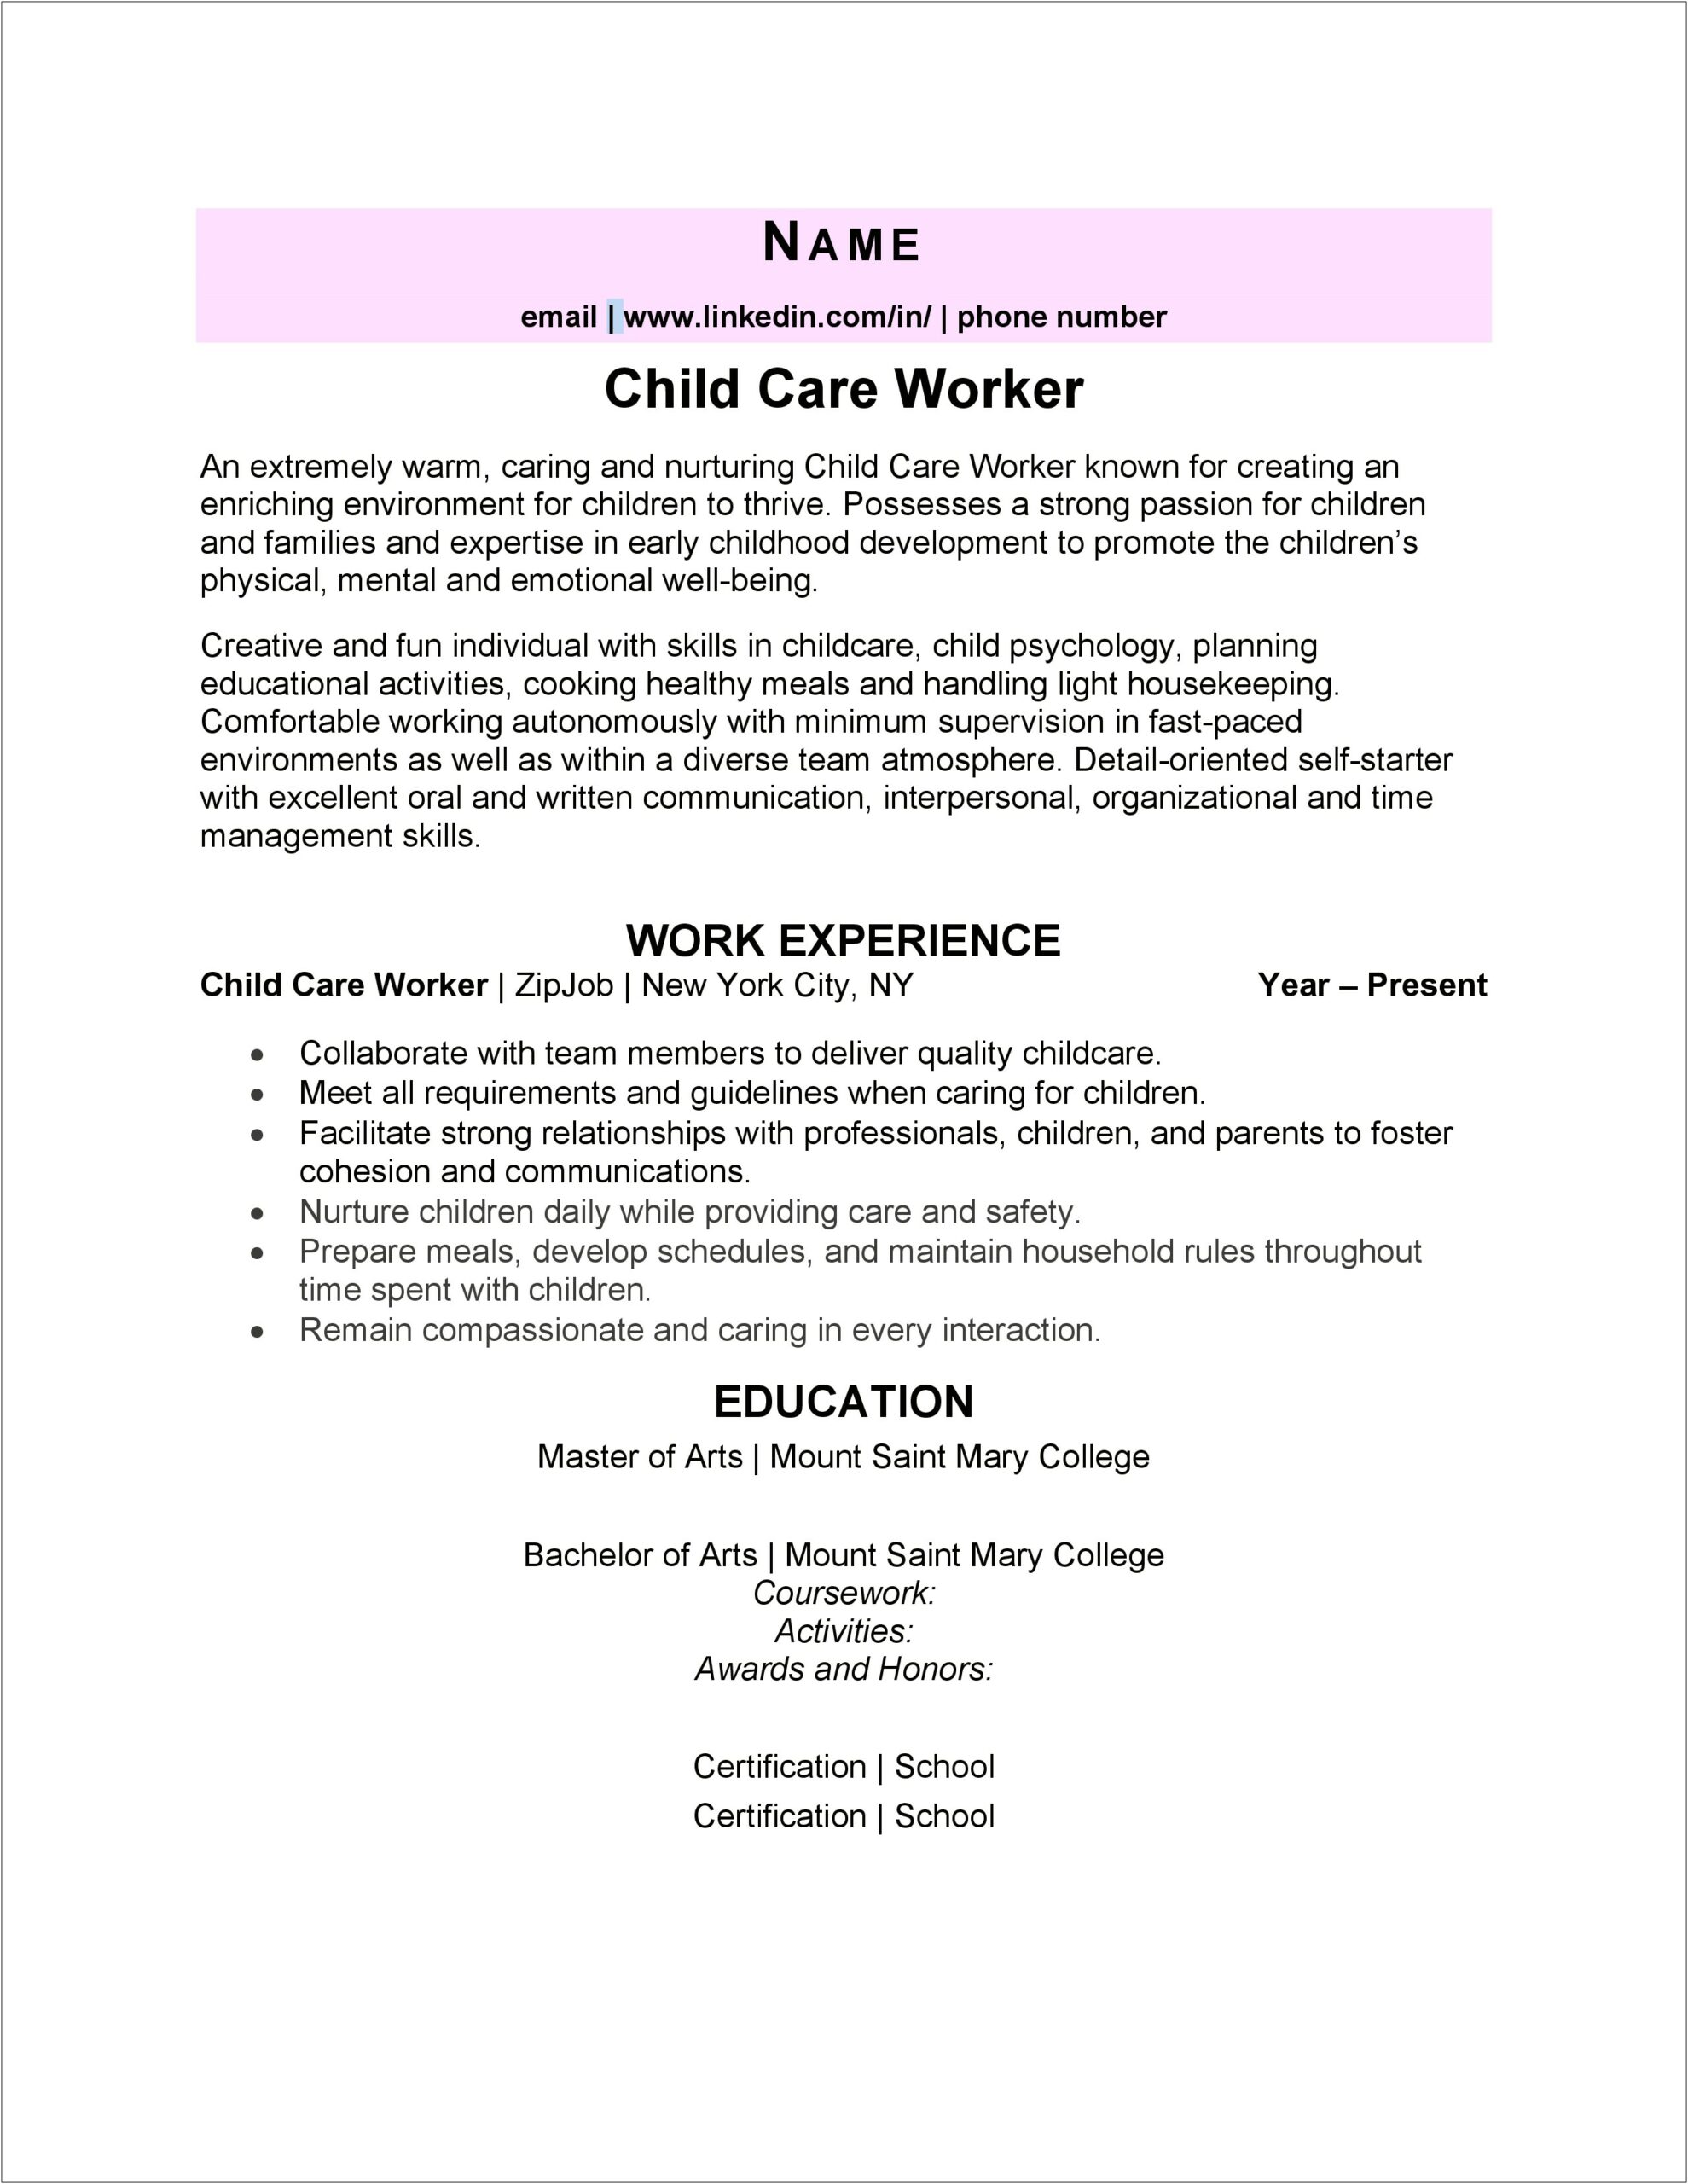 Resume Skills And Abilities For Daycare Worker